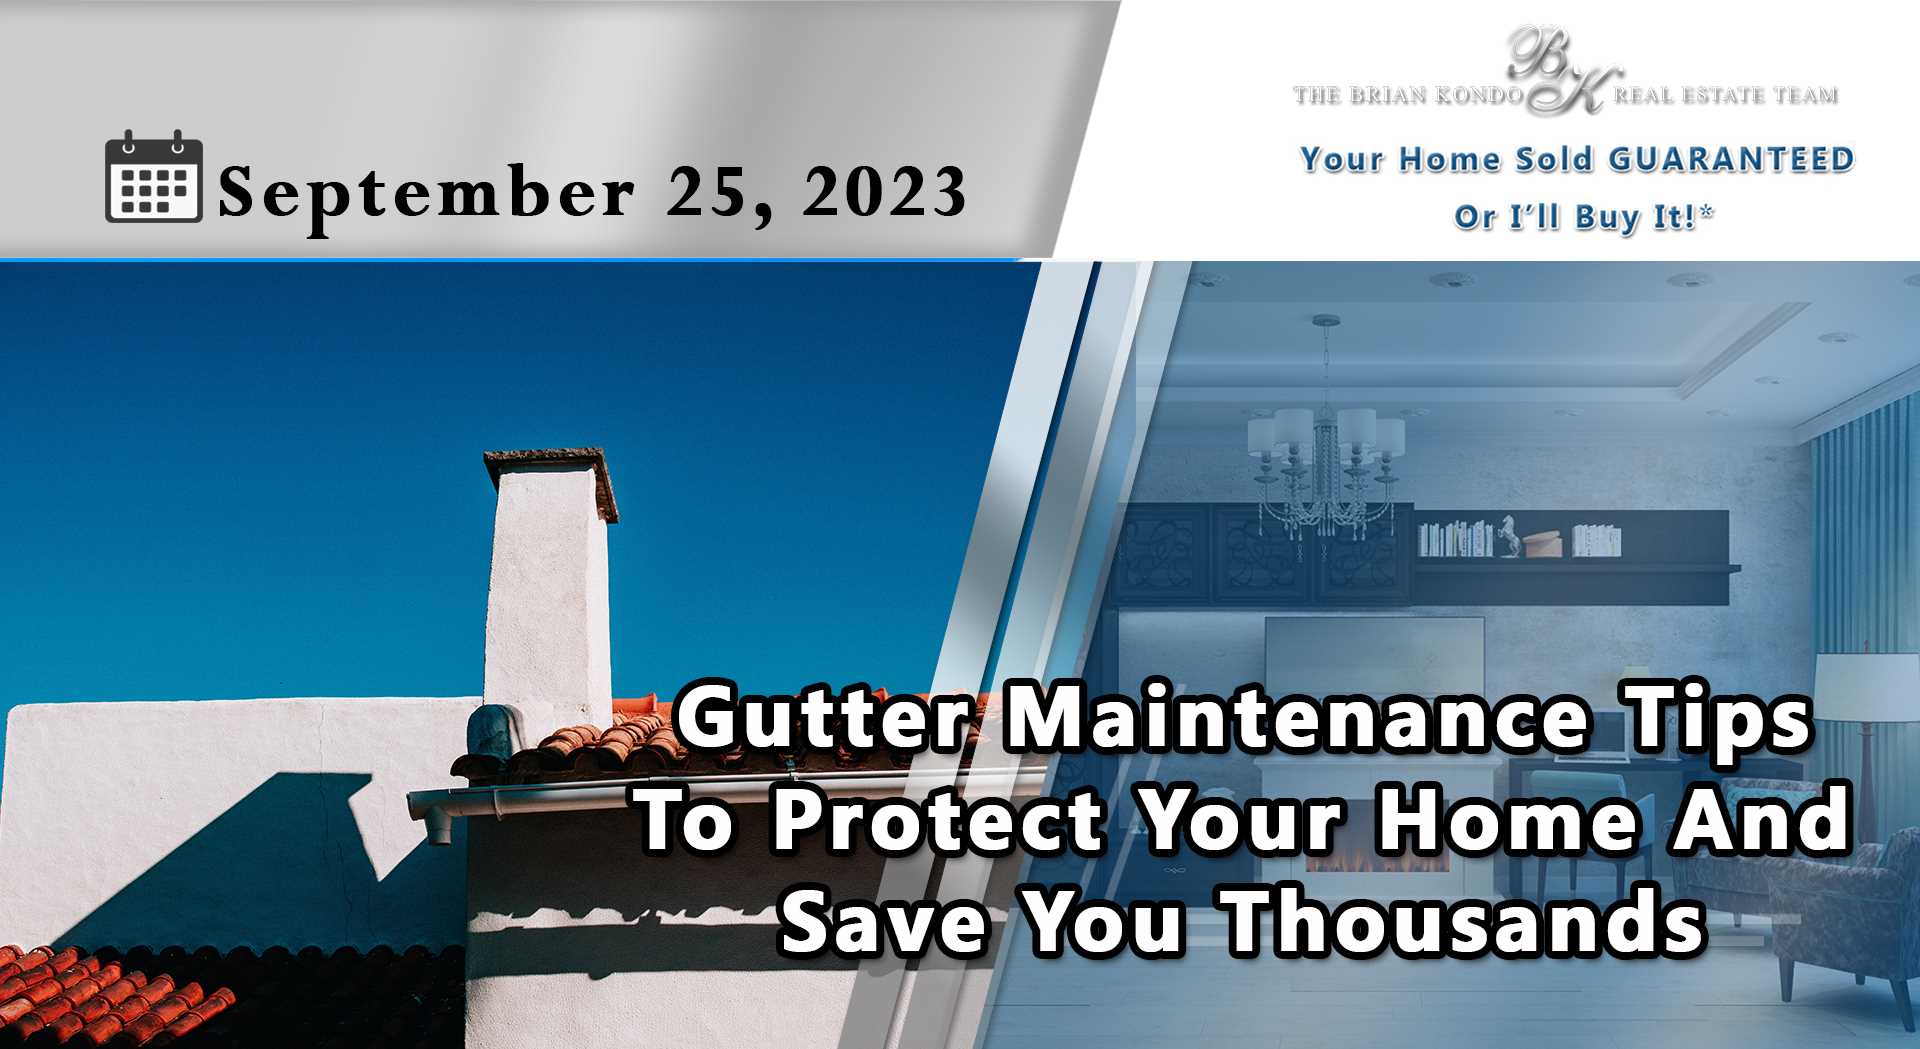 Gutter Maintenance Tips To Protect Your Home And Save You Thousands